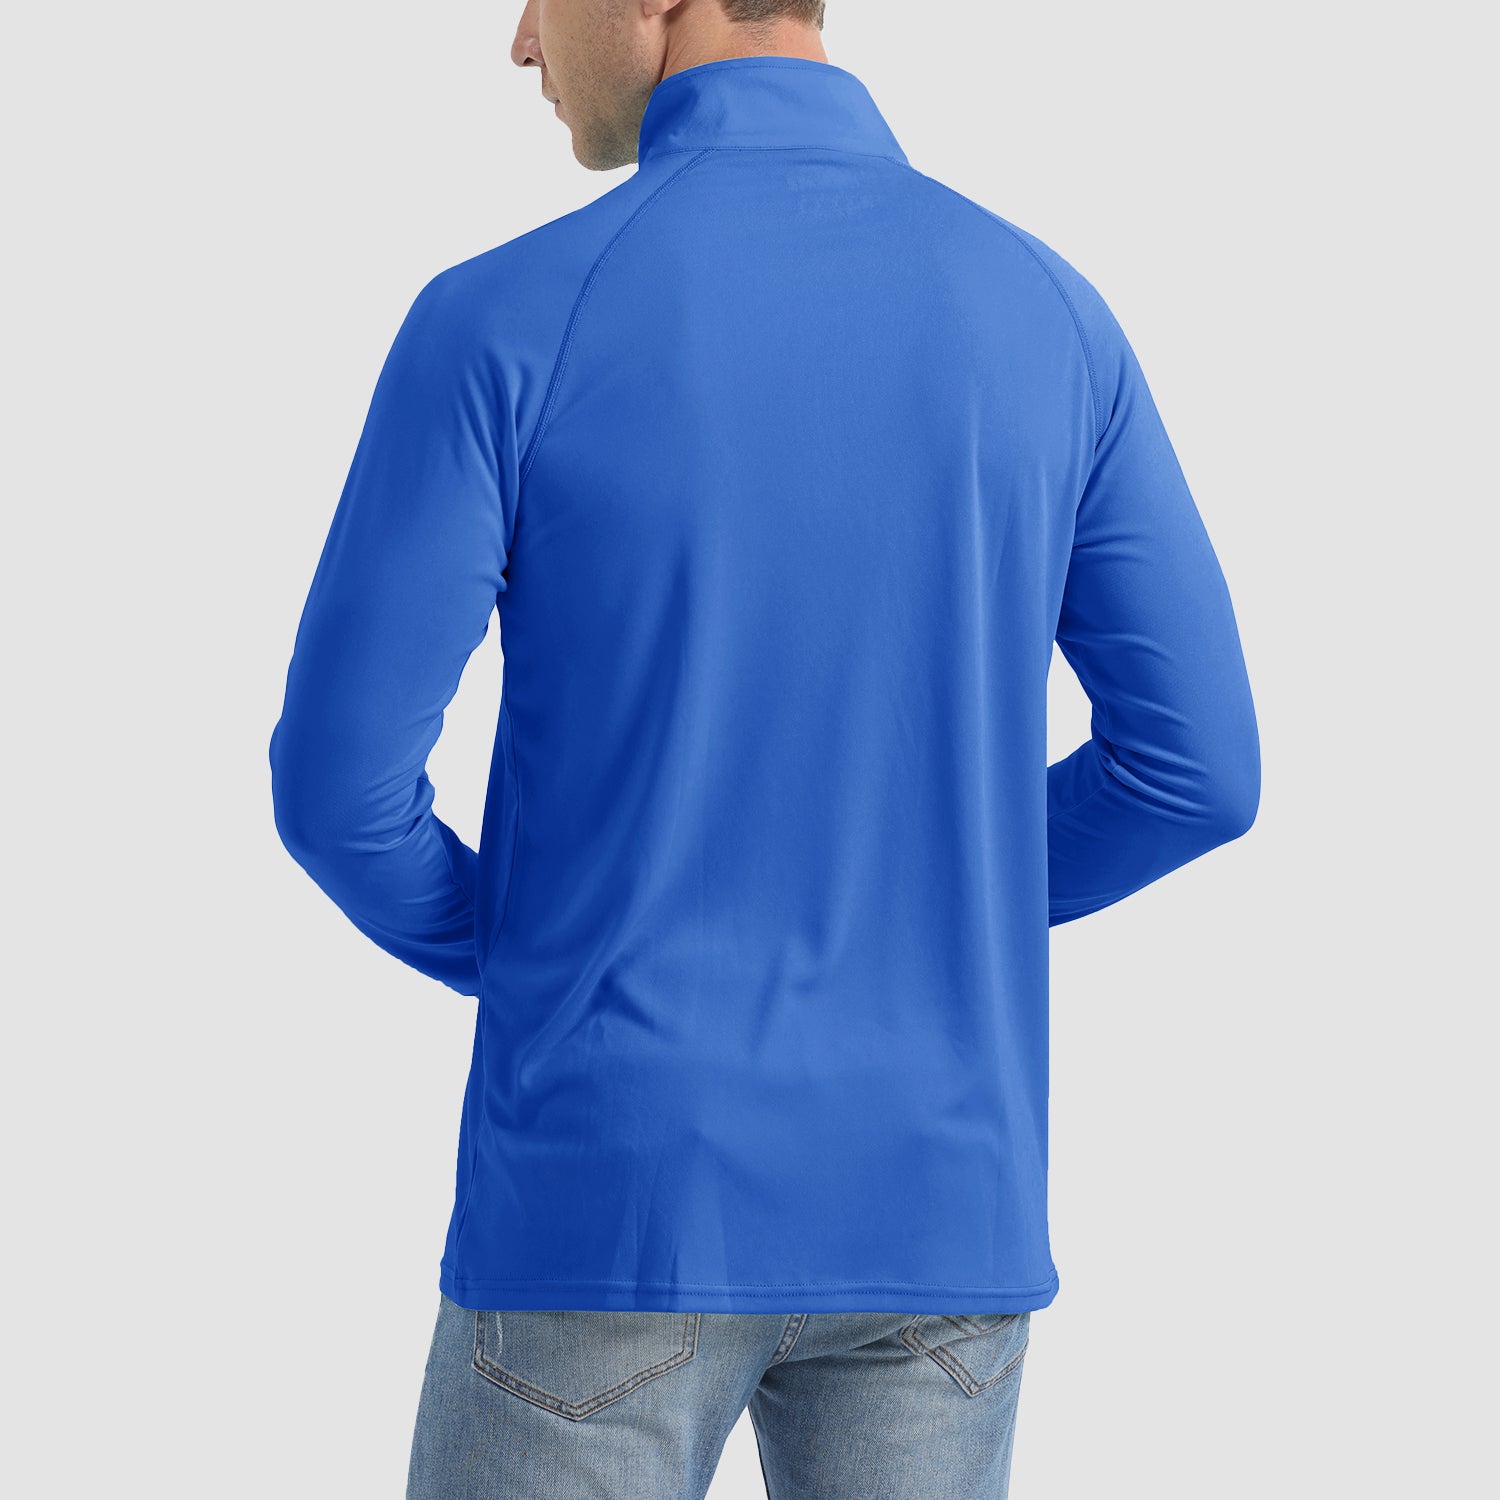 Men's UPF 50 Quick Dry Shirts 1/4 Zip Breathable Long Sleeve Shirts for Outdoor Sports